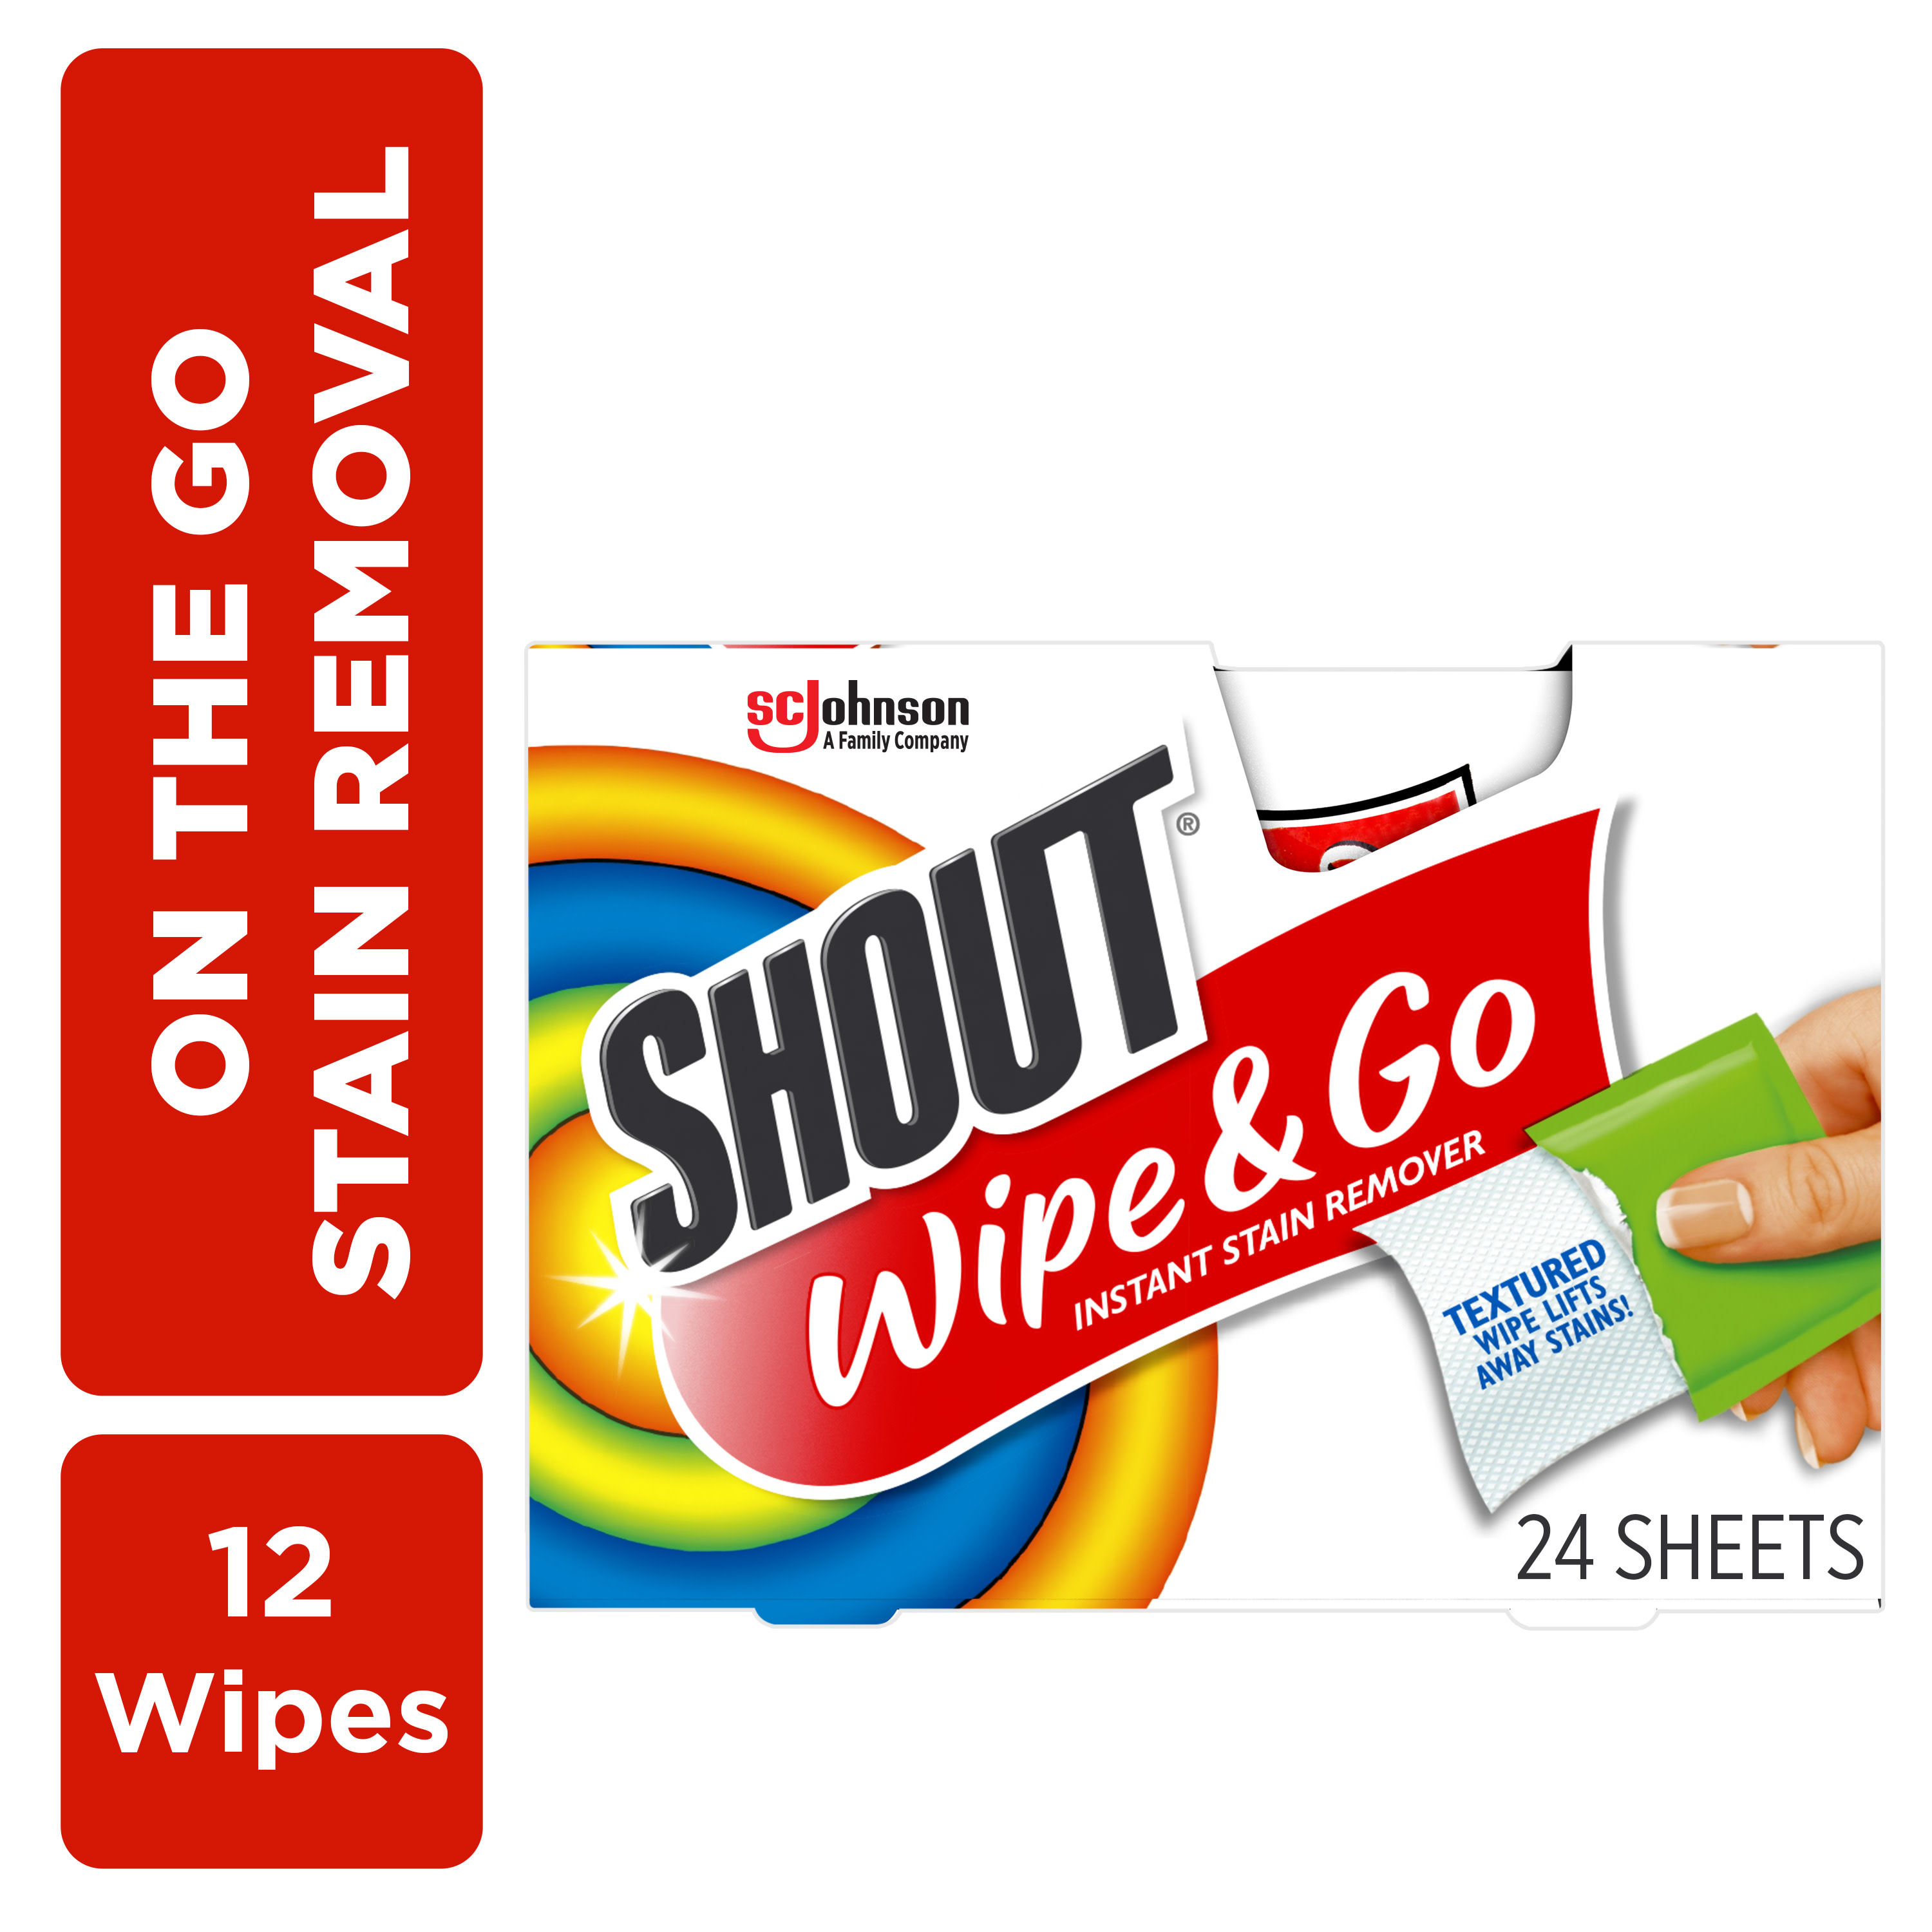 Shout Wipe & Go, Laundry Instant Stain Remover, 12 Wipes - image 1 of 12